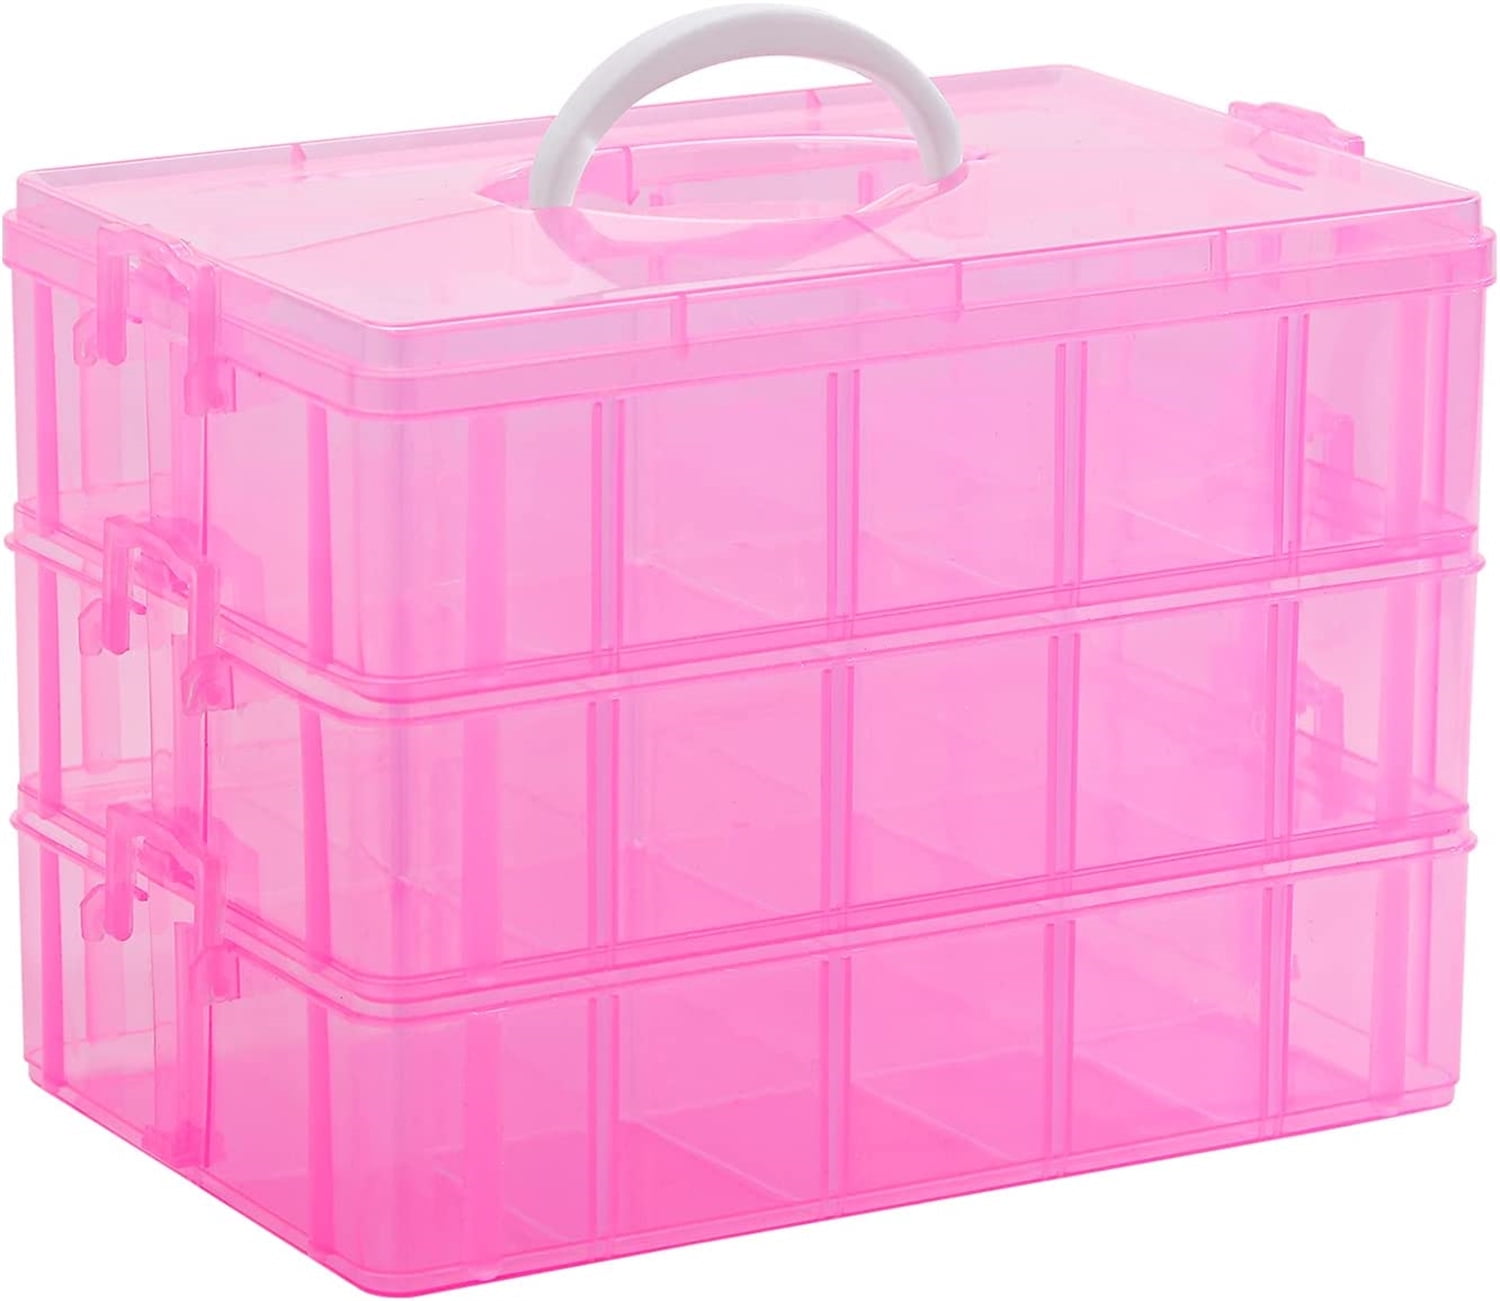 SGHUO 3-Tier Pink Craft Storage Container, Stackable Organizer Box with  Dividers for Art Supplies, Beads, Washi Tapes, Seed, Hair Accessories,  Nail